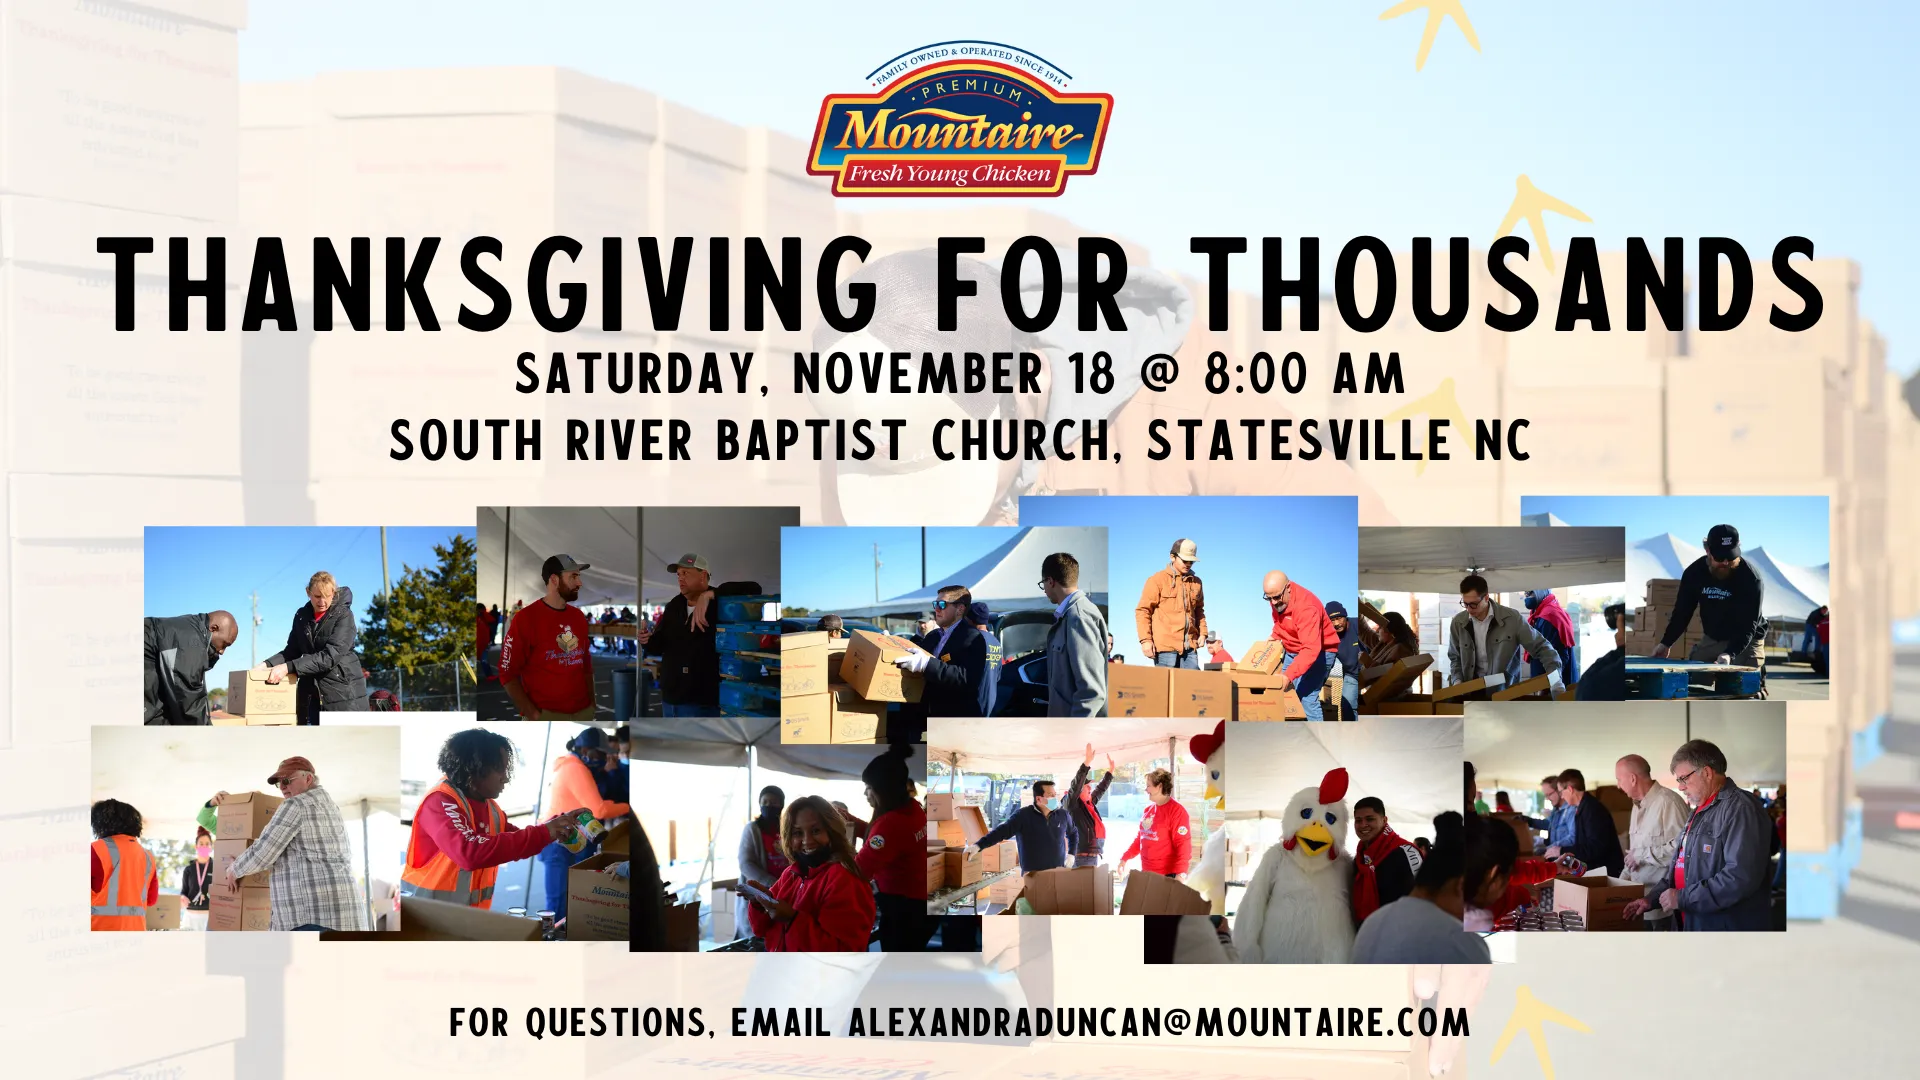 Mountaire Farms hosts Thanksgiving for Thousands